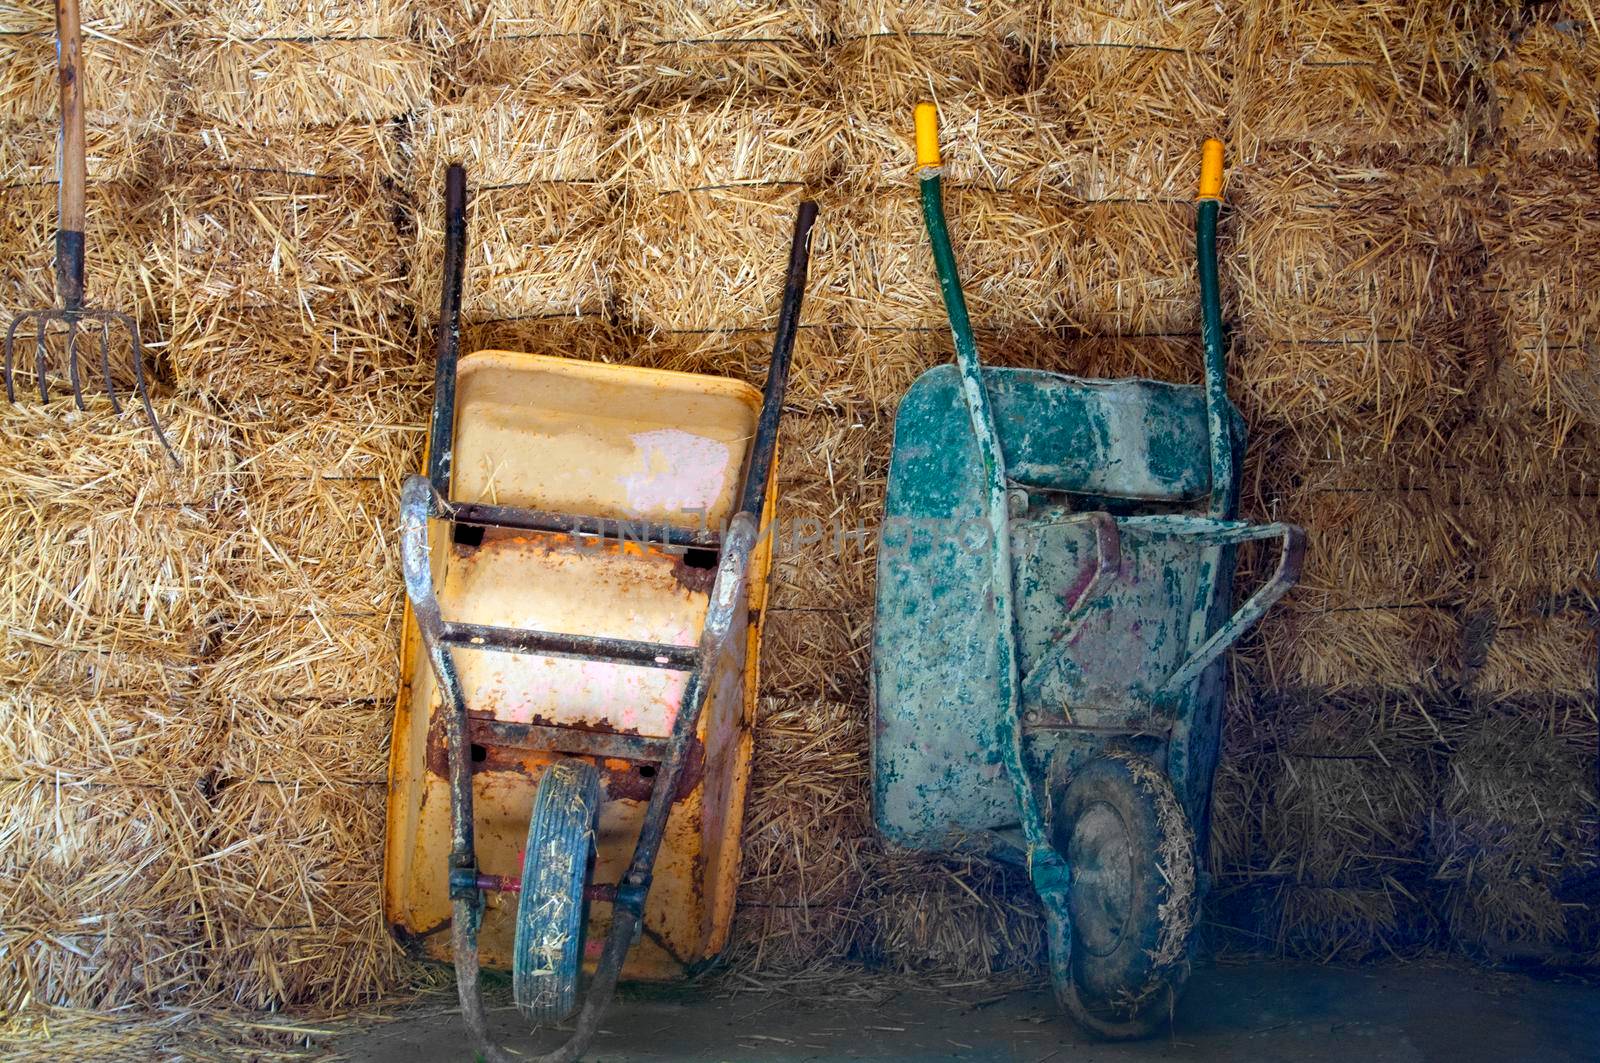 Two old wheelbarrows on the hay background, farm